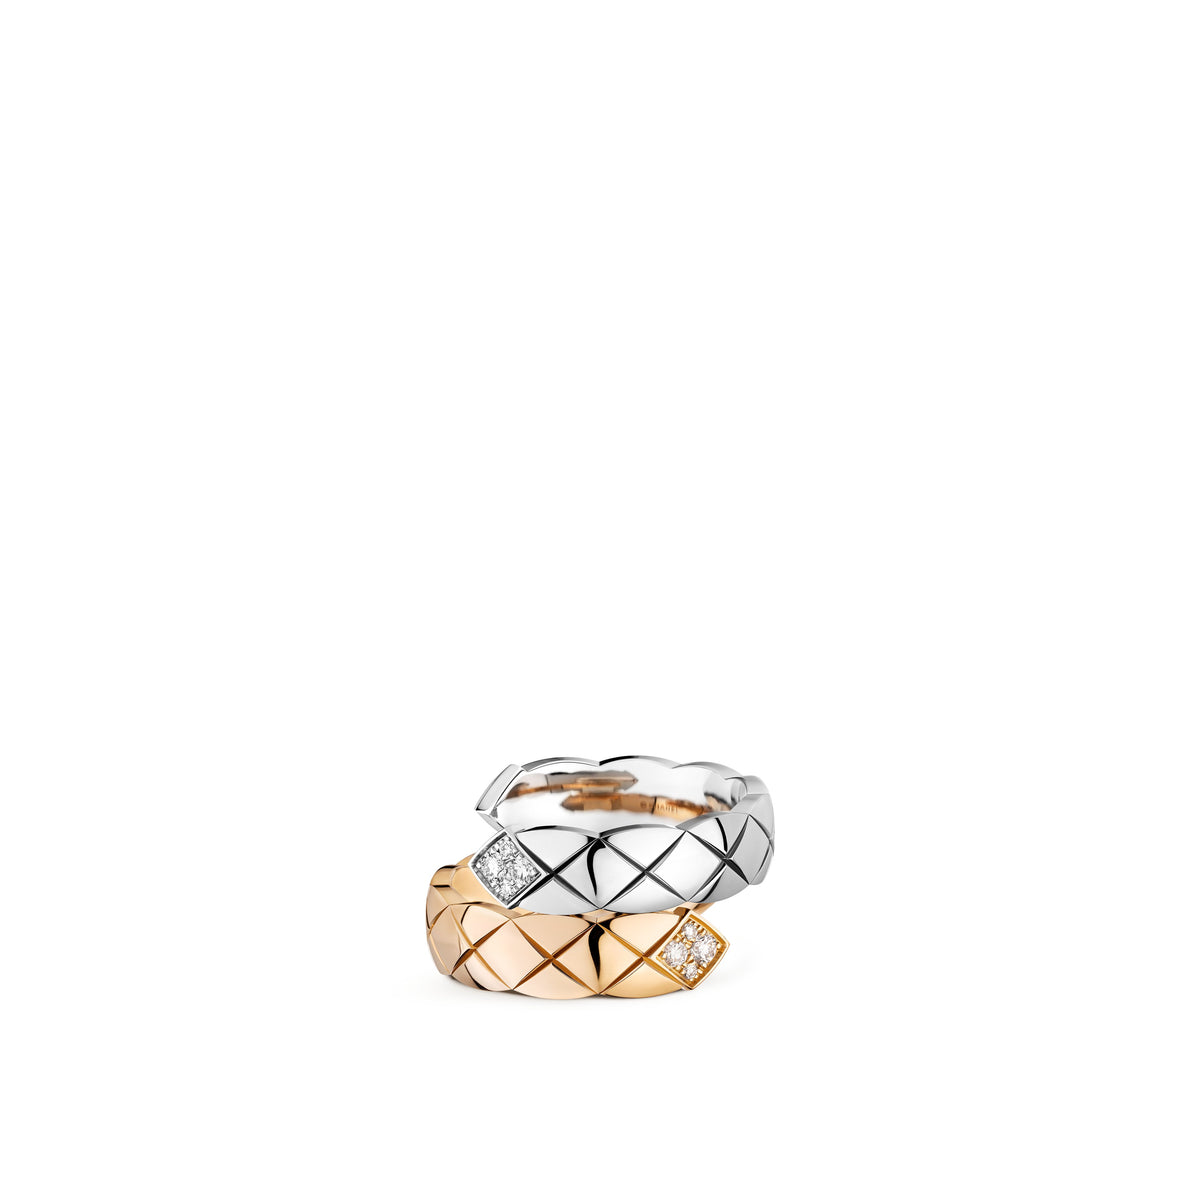 18k Beige and White Gold 0.03cttw Coco Crush Toi Et Moi Ring Size 6.75